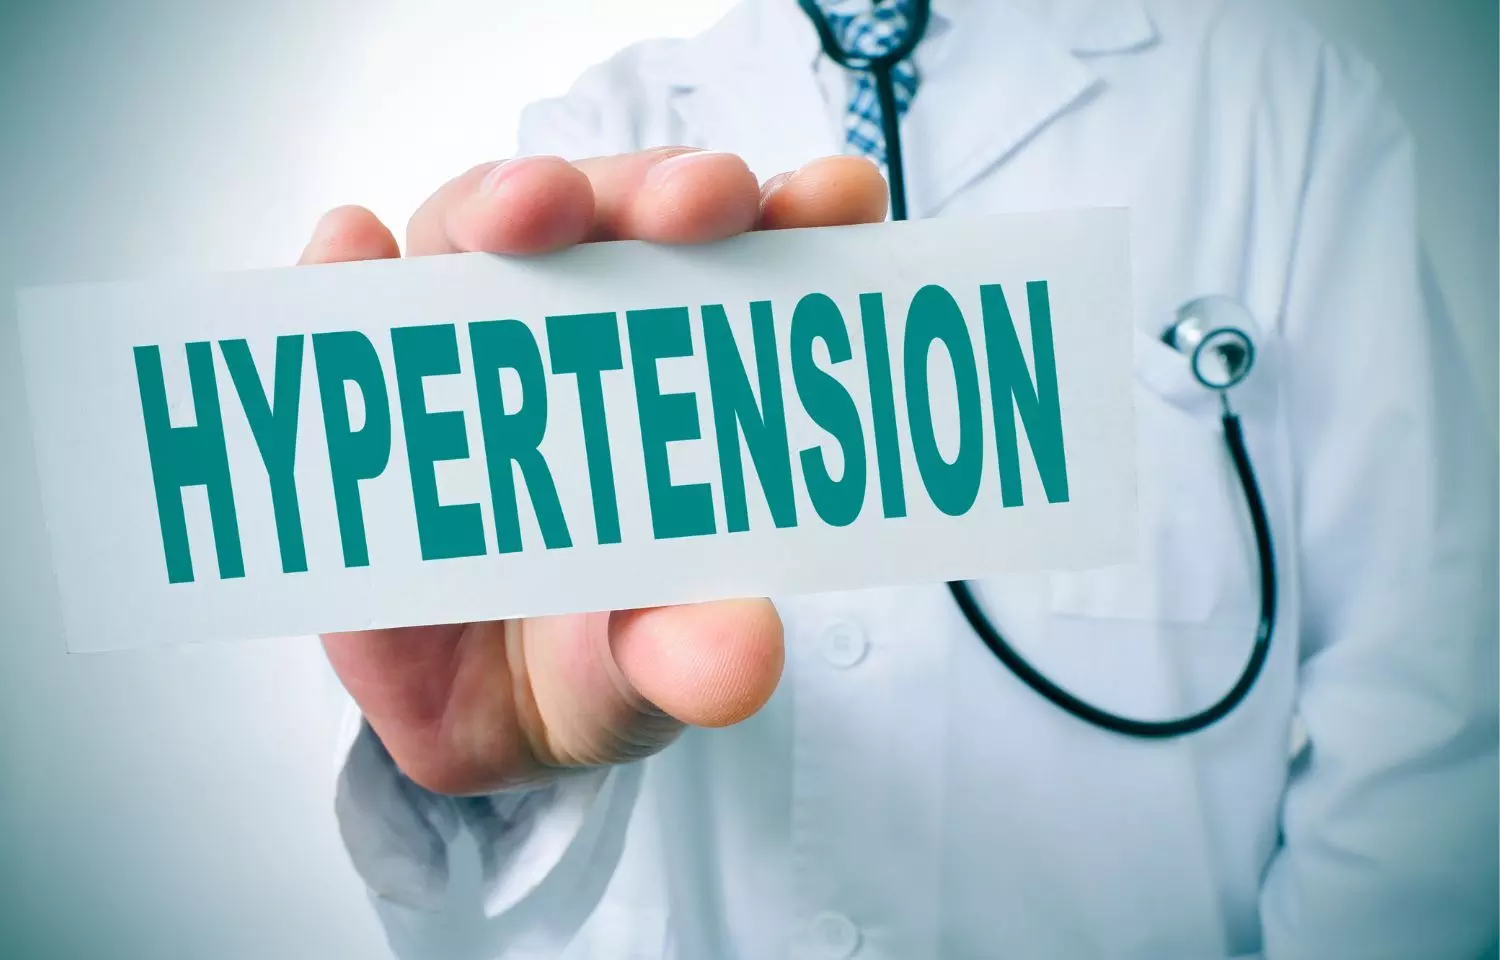 Transcranial stimulation lowers BP in patients with resistant hypertension, study shows